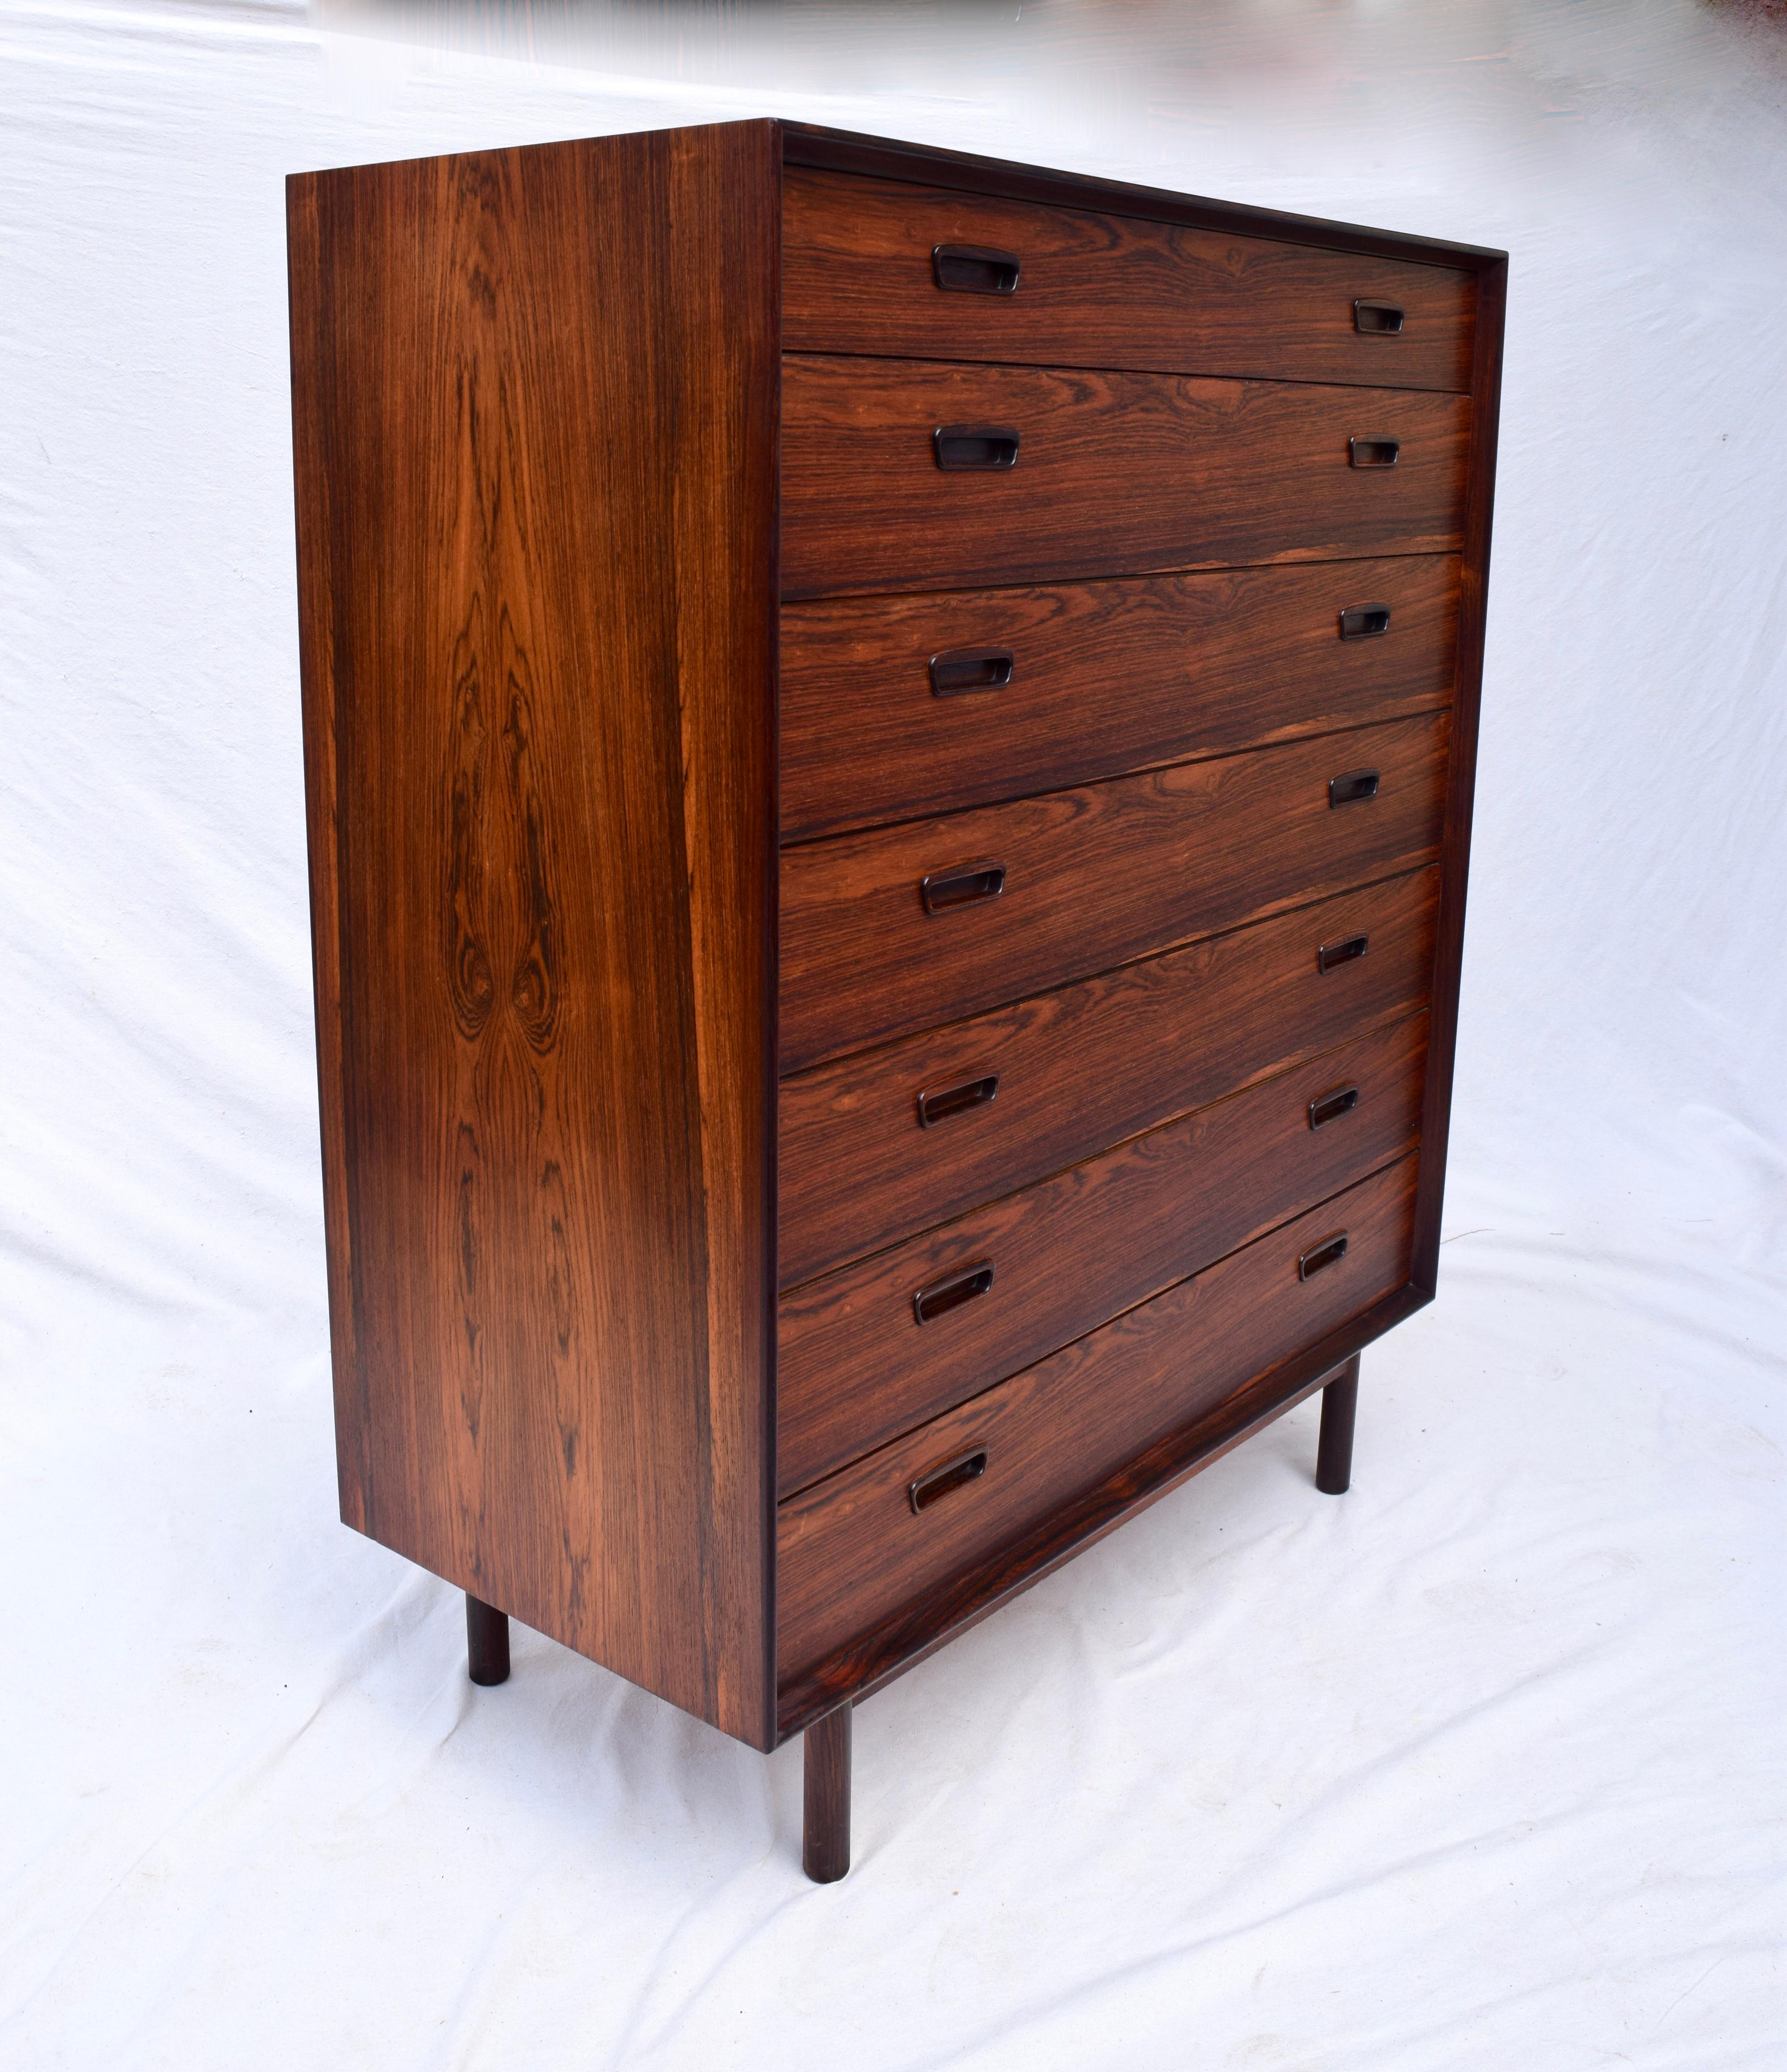 Rosewood chest of seven drawers attributed to Poul Hundevad. An unusually striking piece of generous dimensions in terms of Danish upright styles, having Insert handles and finished on all four sides. Solid wood construction. Very much in the manner